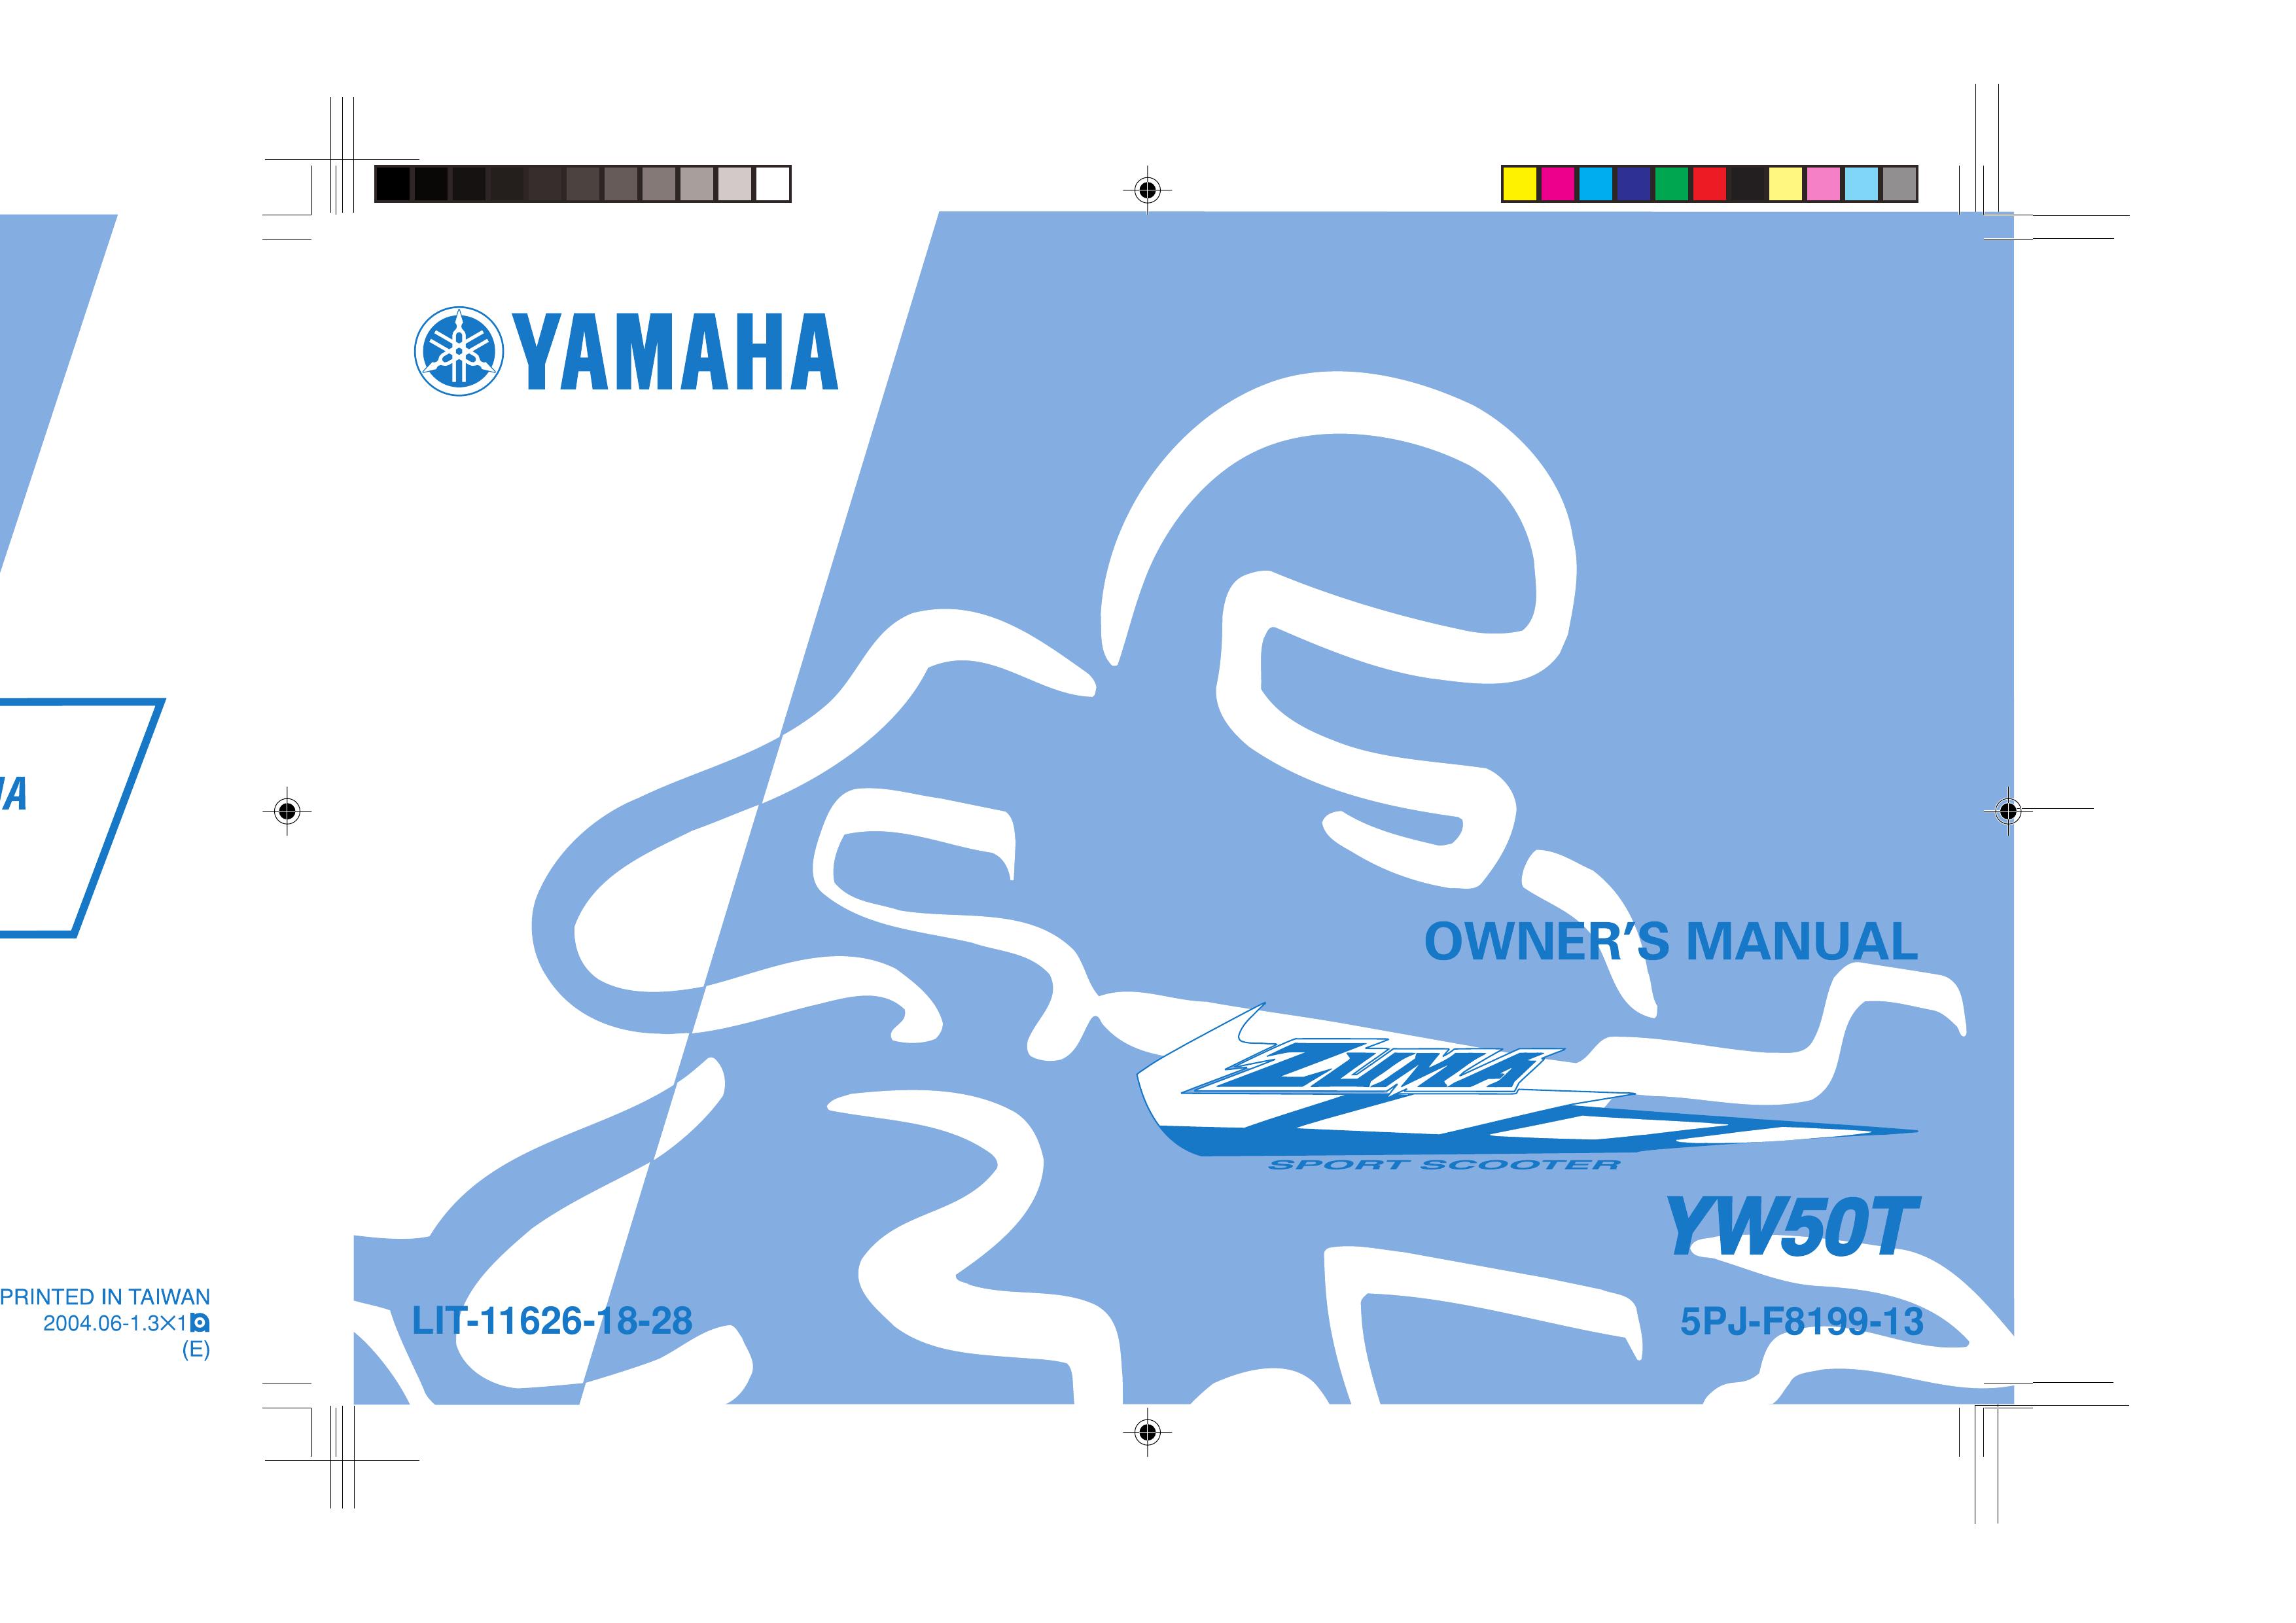 Yamaha YW50T Mobility Aid User Manual